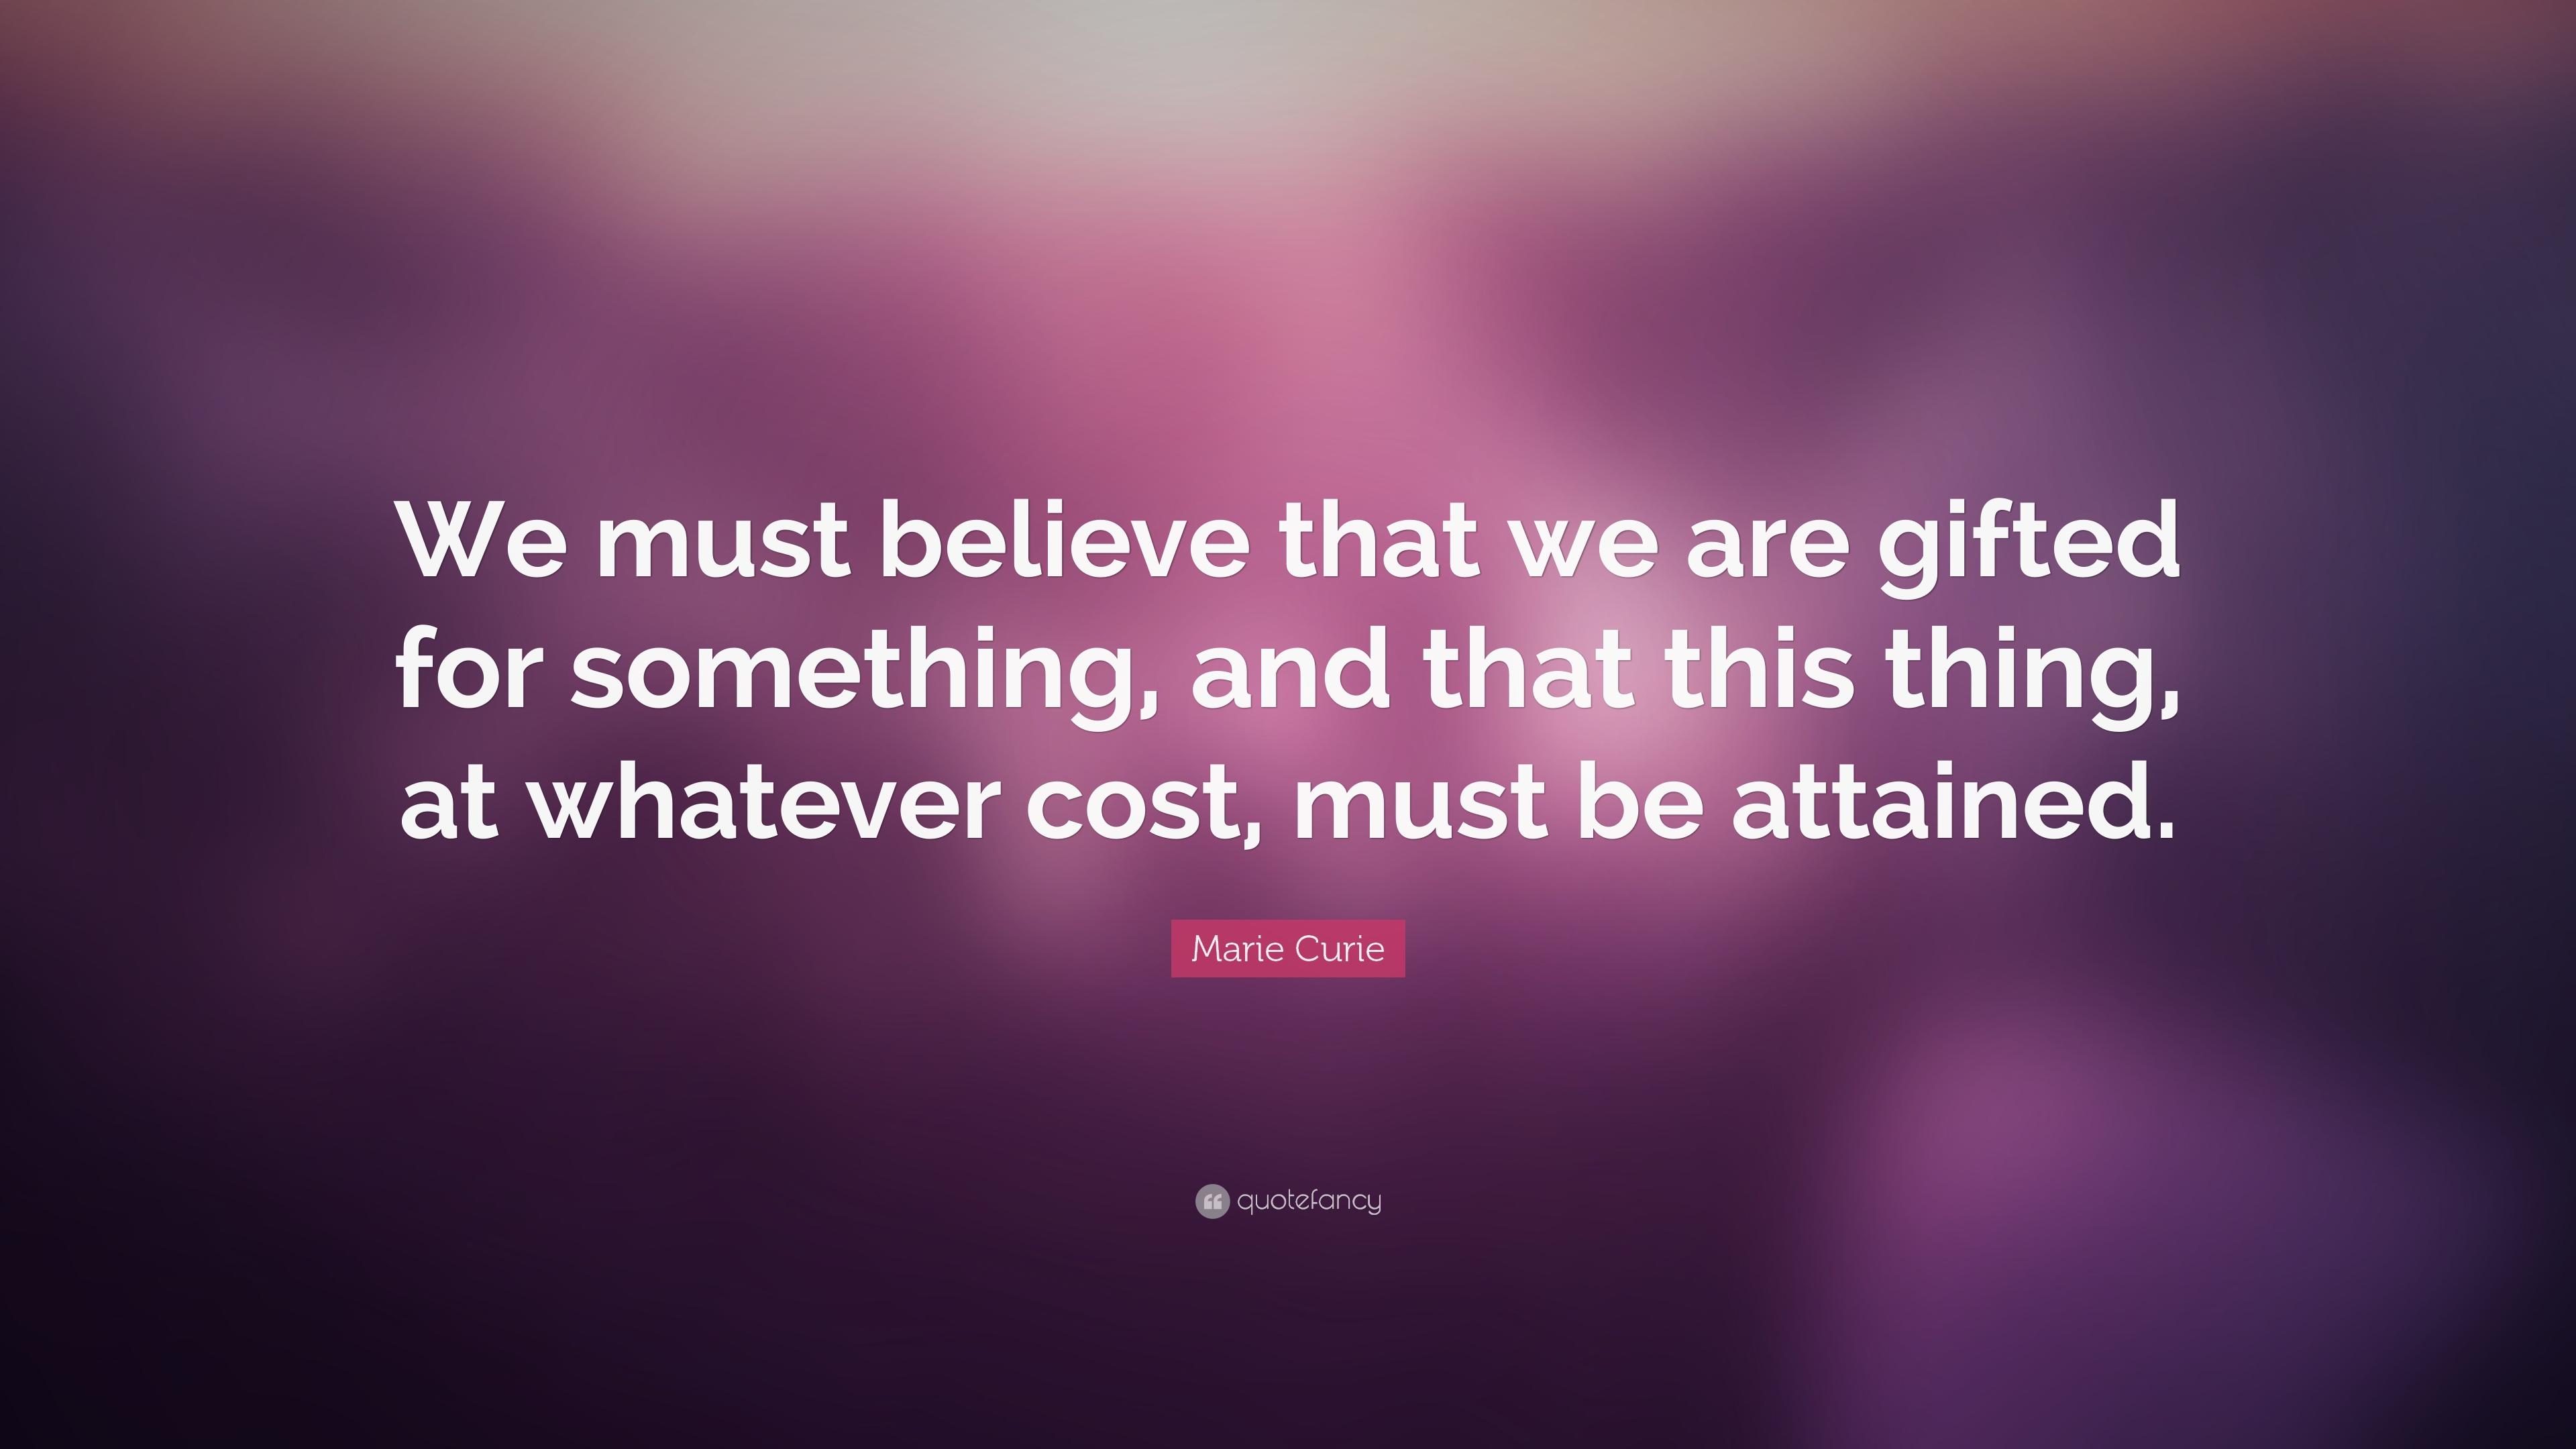 Marie Curie Quote: “We must believe that we are gifted